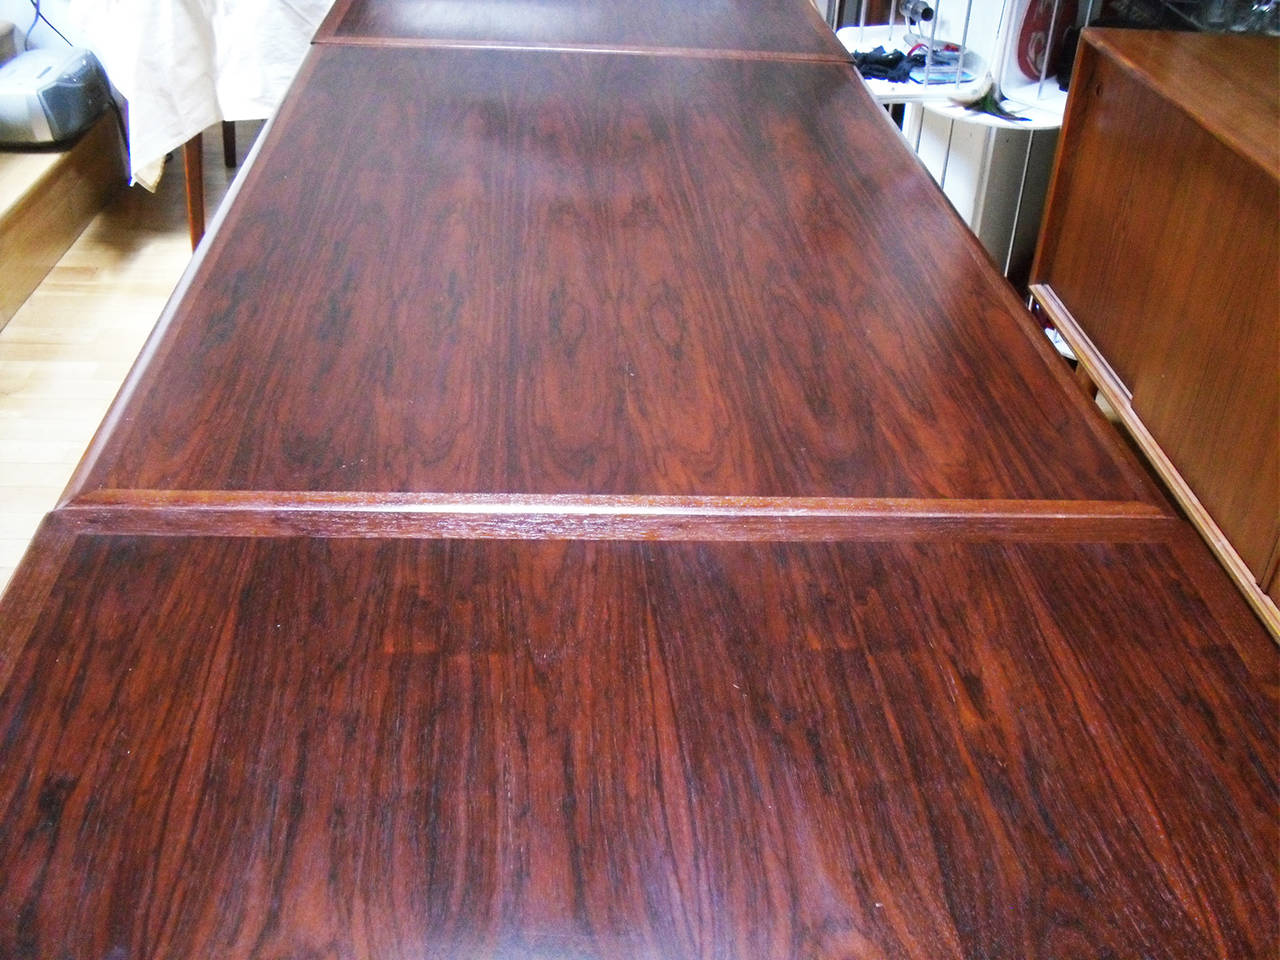 Mid Century Modern Rosewood Extendable Dining Table
Table measured: H30